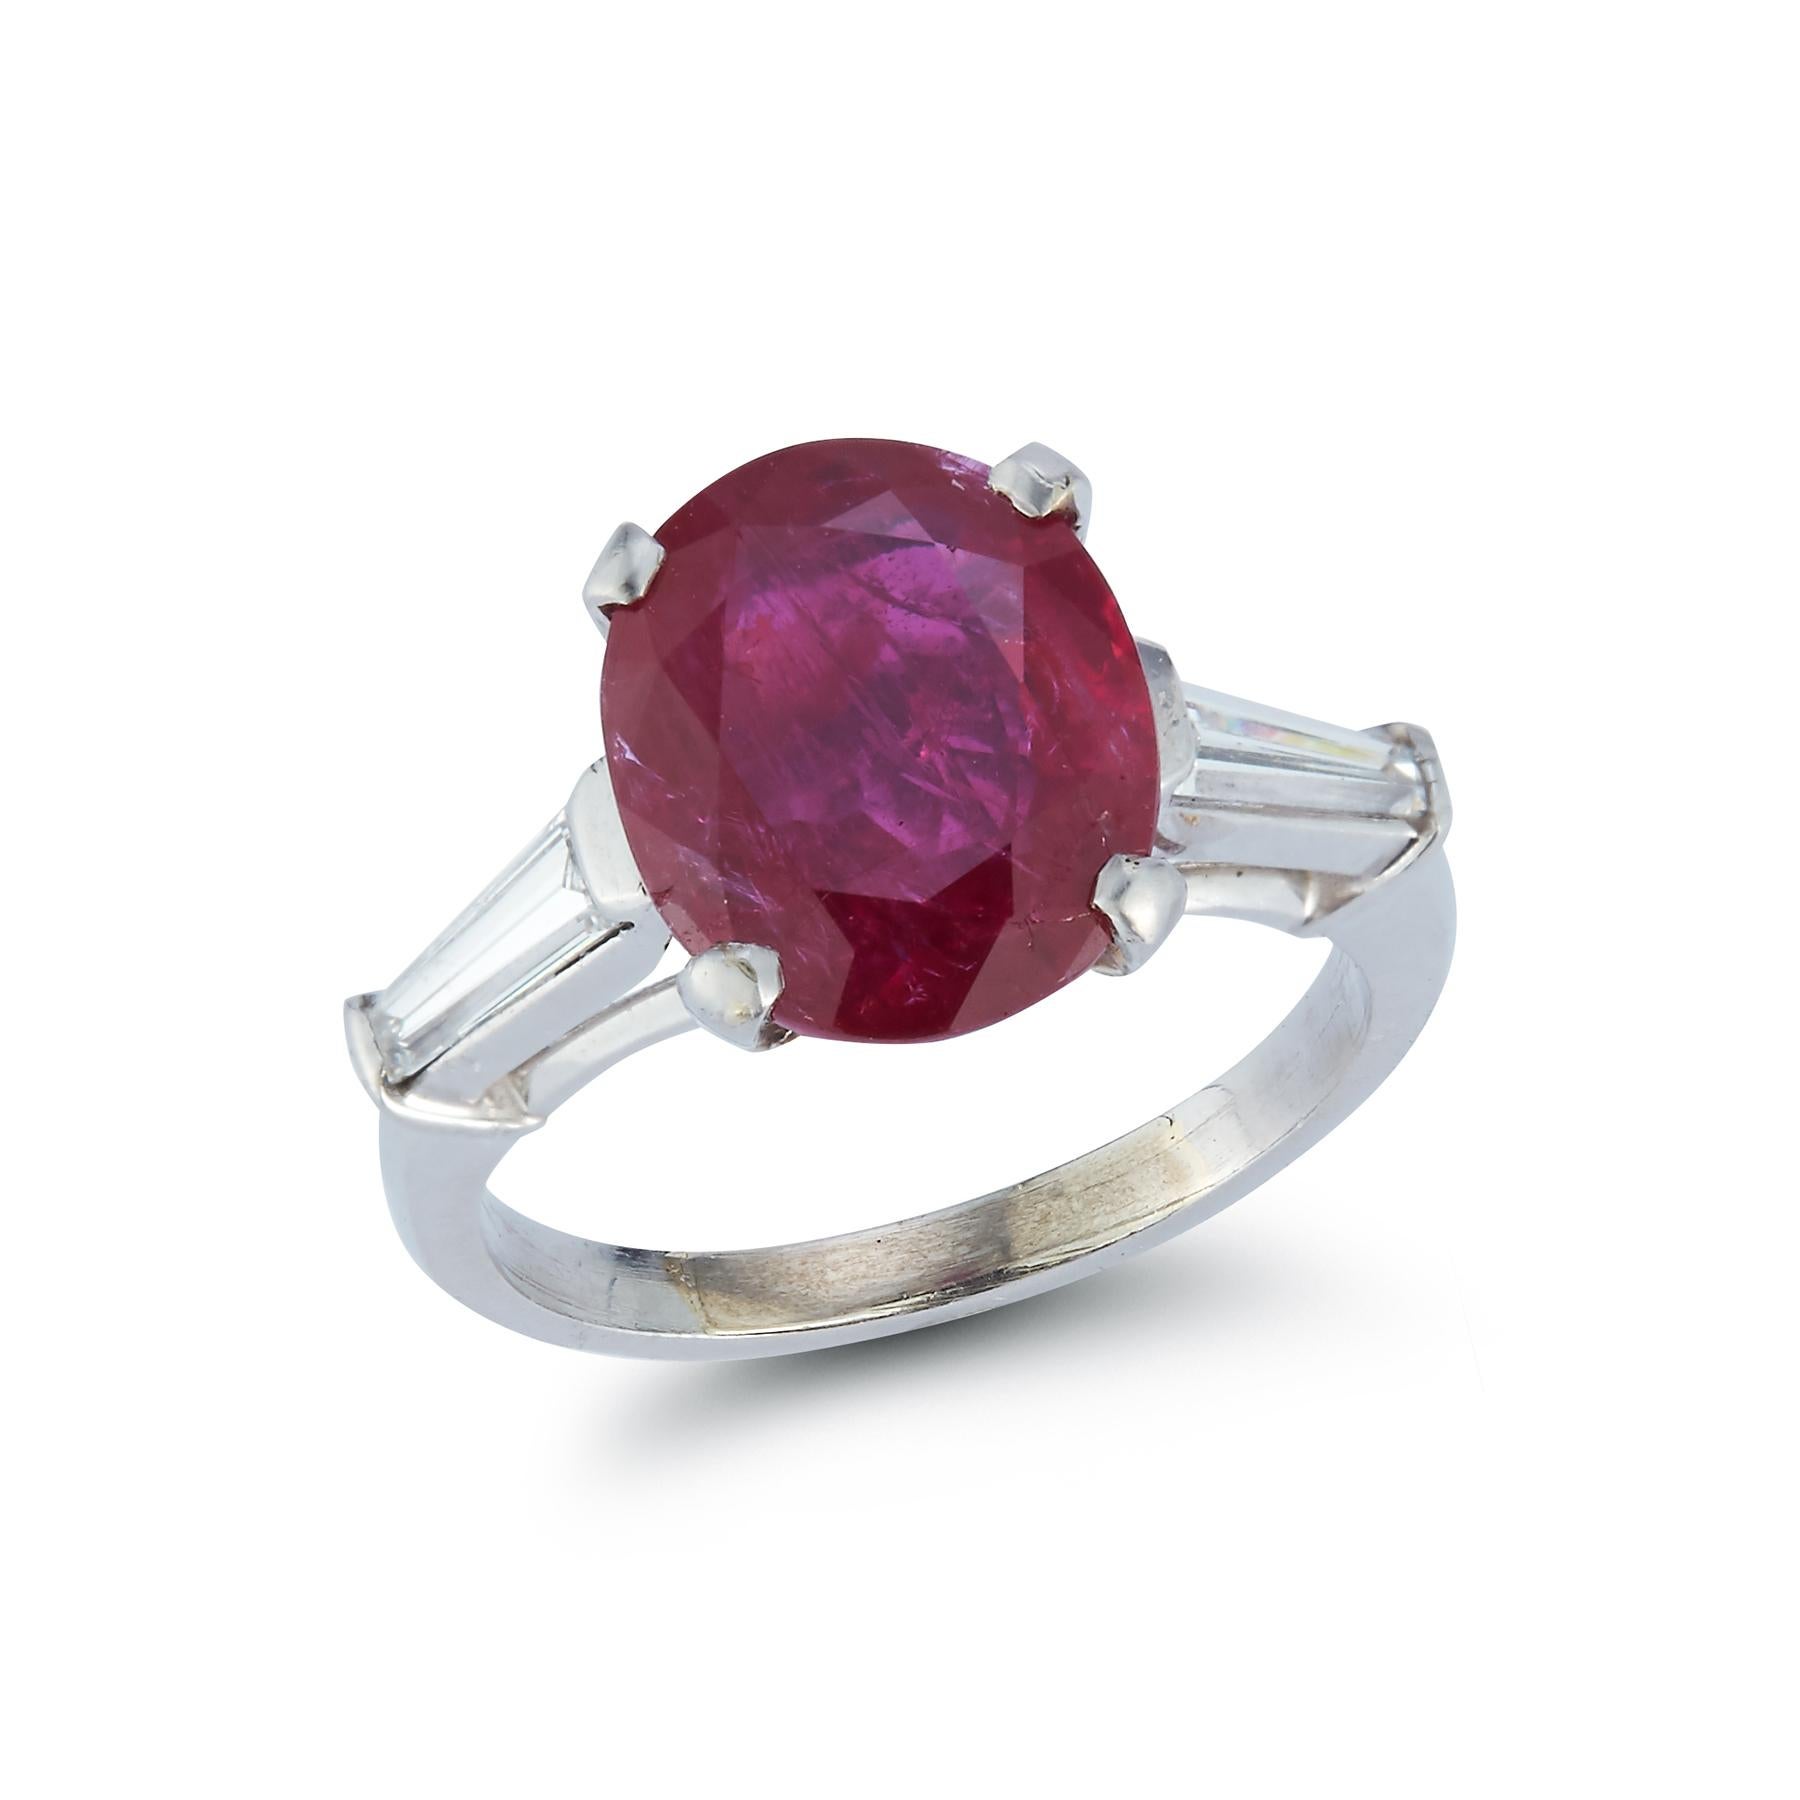  CertifiedNatural Oval Cut Ruby & Diamond Ring 
Gold Type: Platinum
Ruby Weight: 4.84 Cts
Ring Size: 6
Re-sizable free of charge 